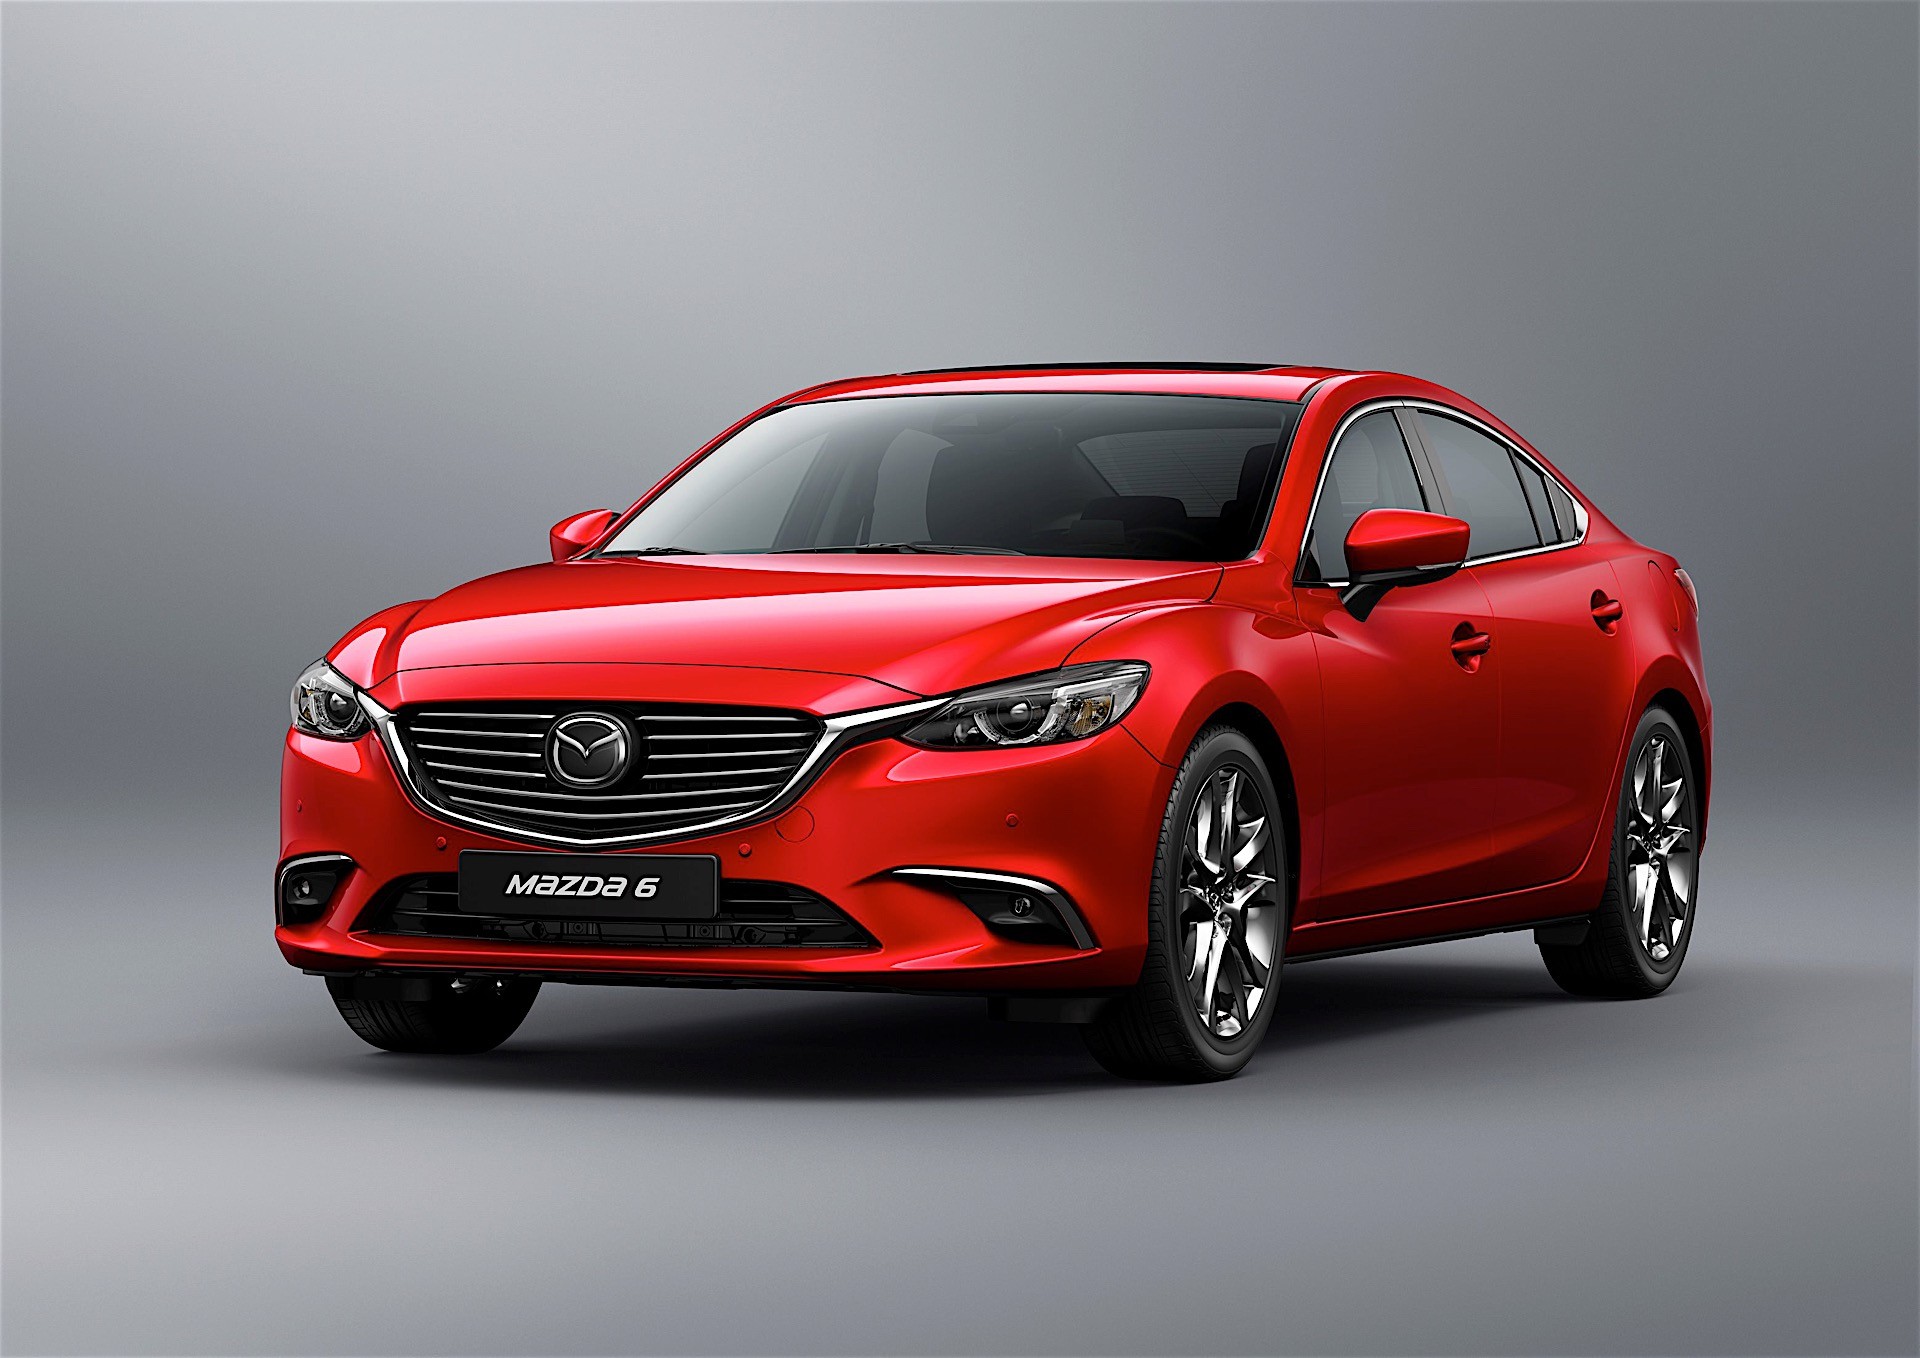 2017 Mazda6 Will Be Launched In Europe This Autumn, Has G-Vectoring ...